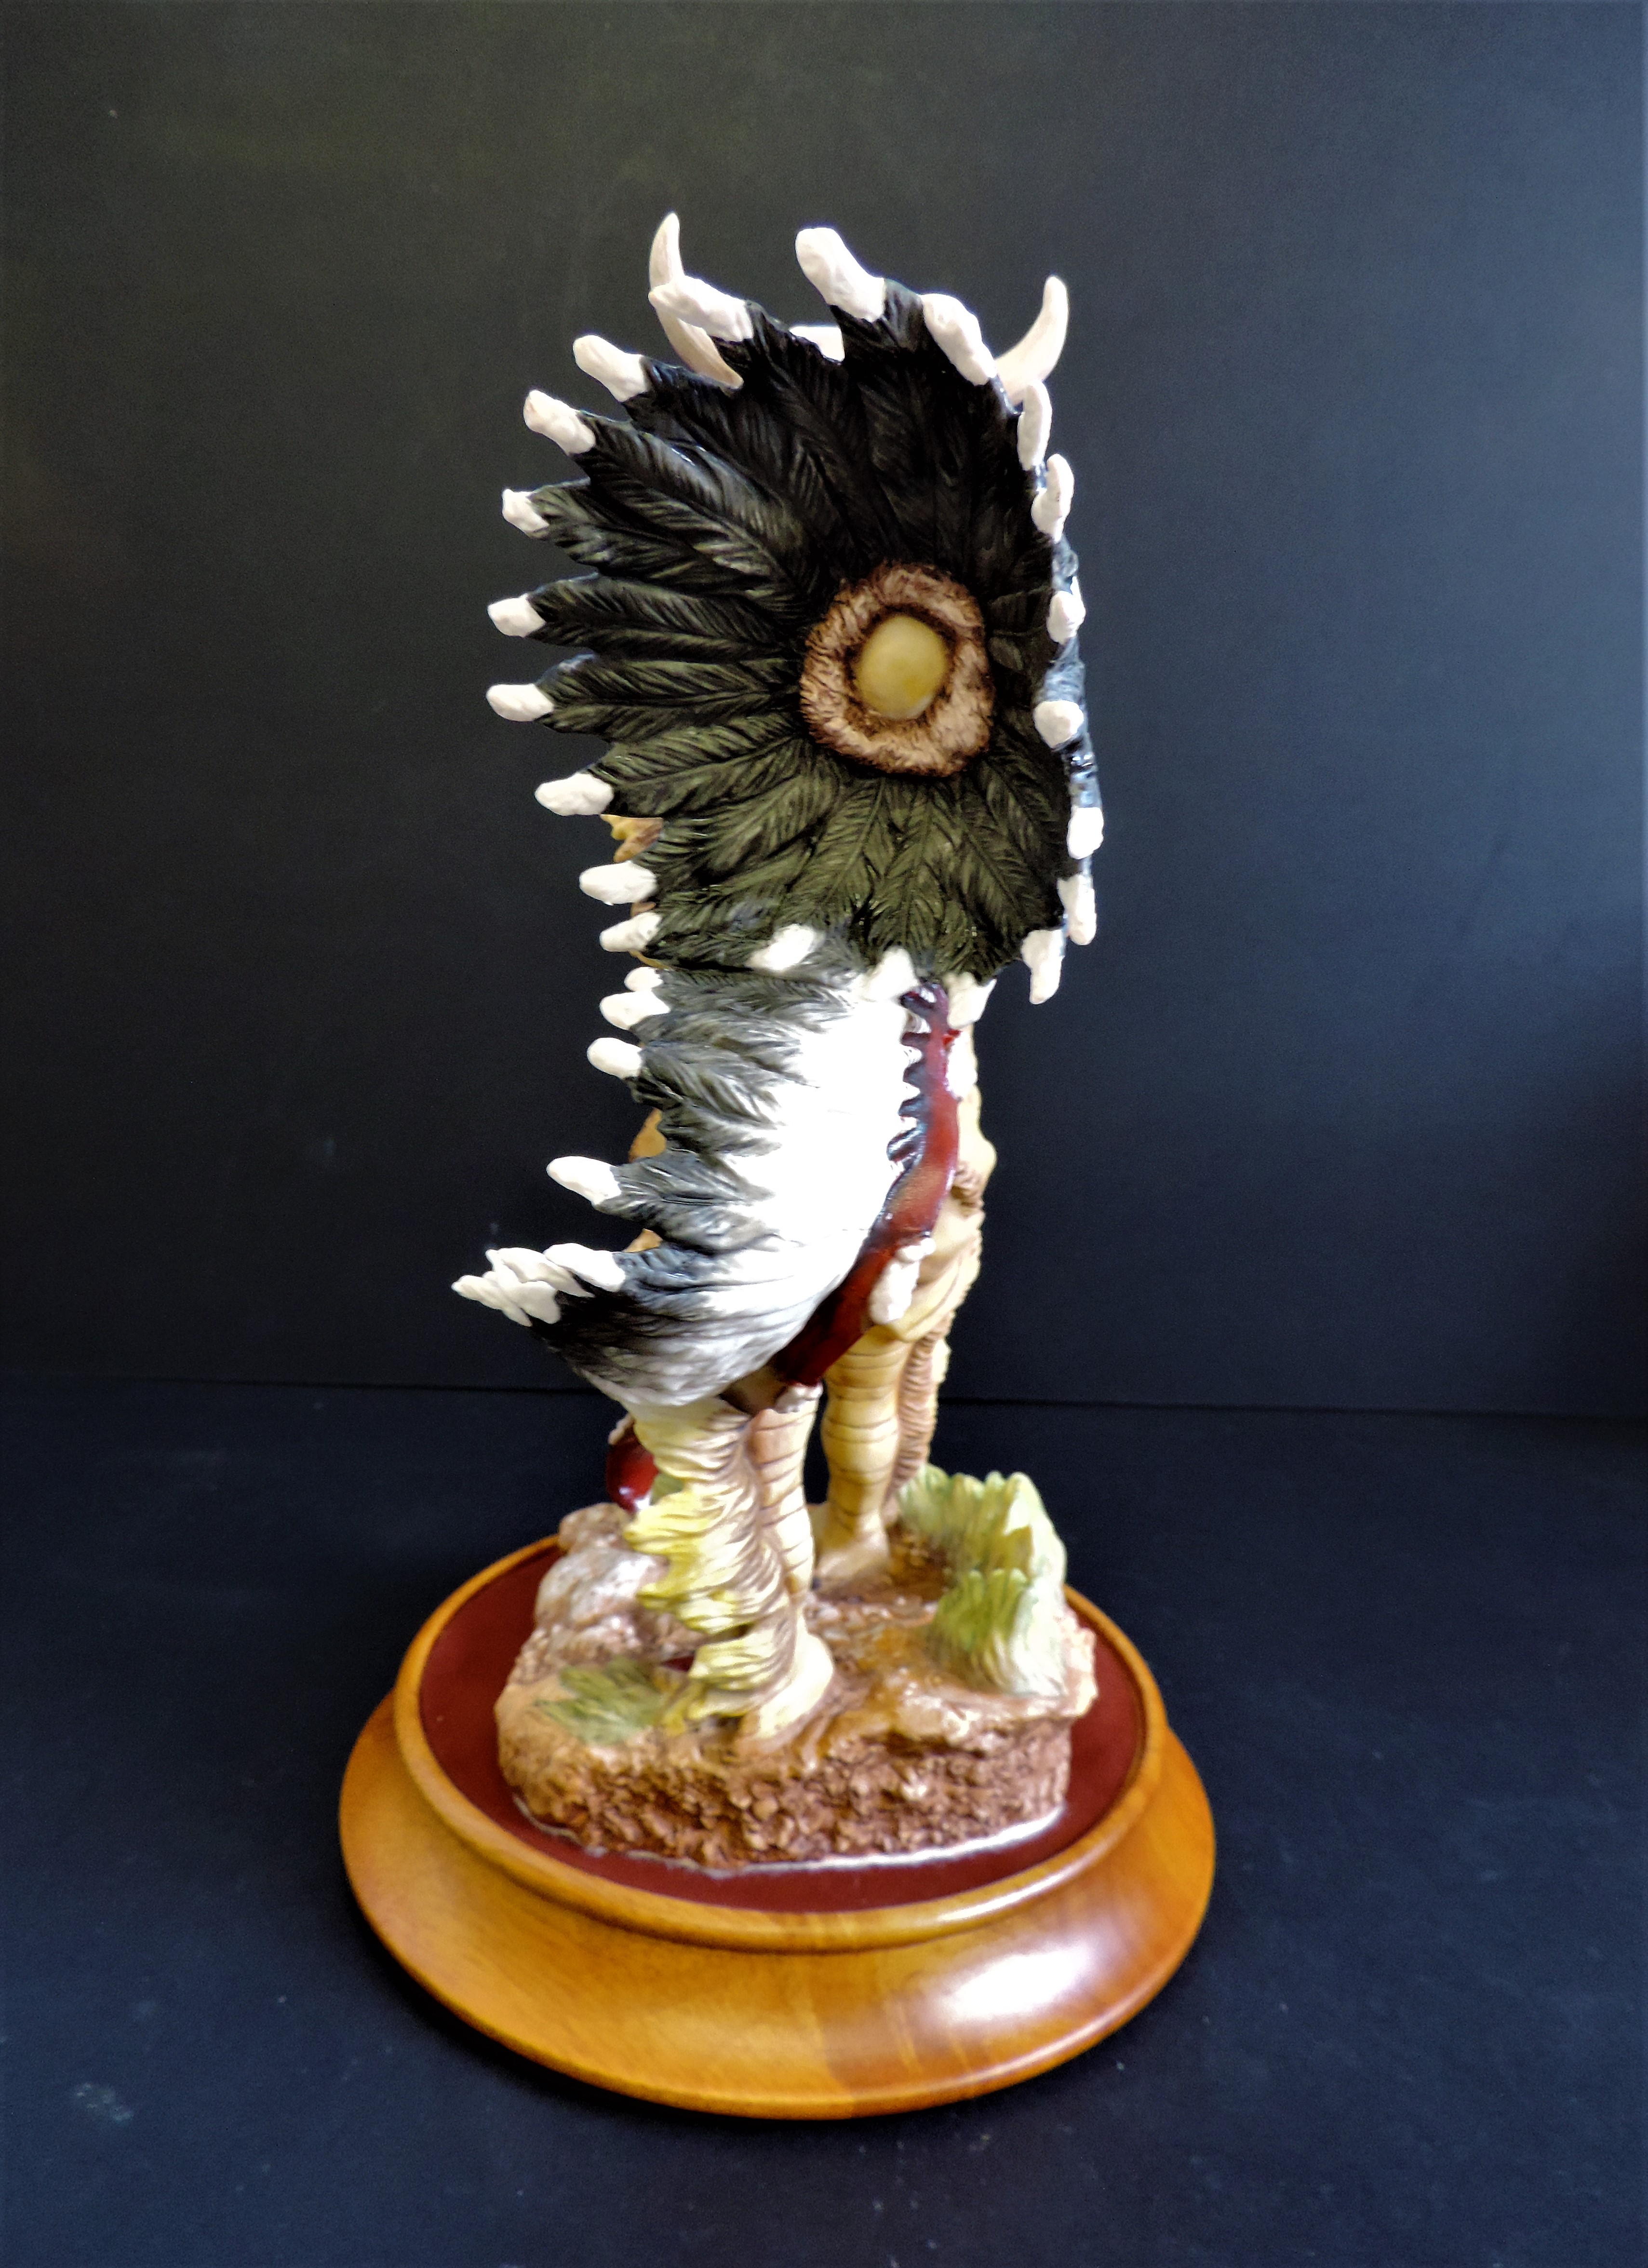 Franklin Mint Prayer to the Great Spirit Porcelain Sculpture - Very Rare - Image 4 of 8